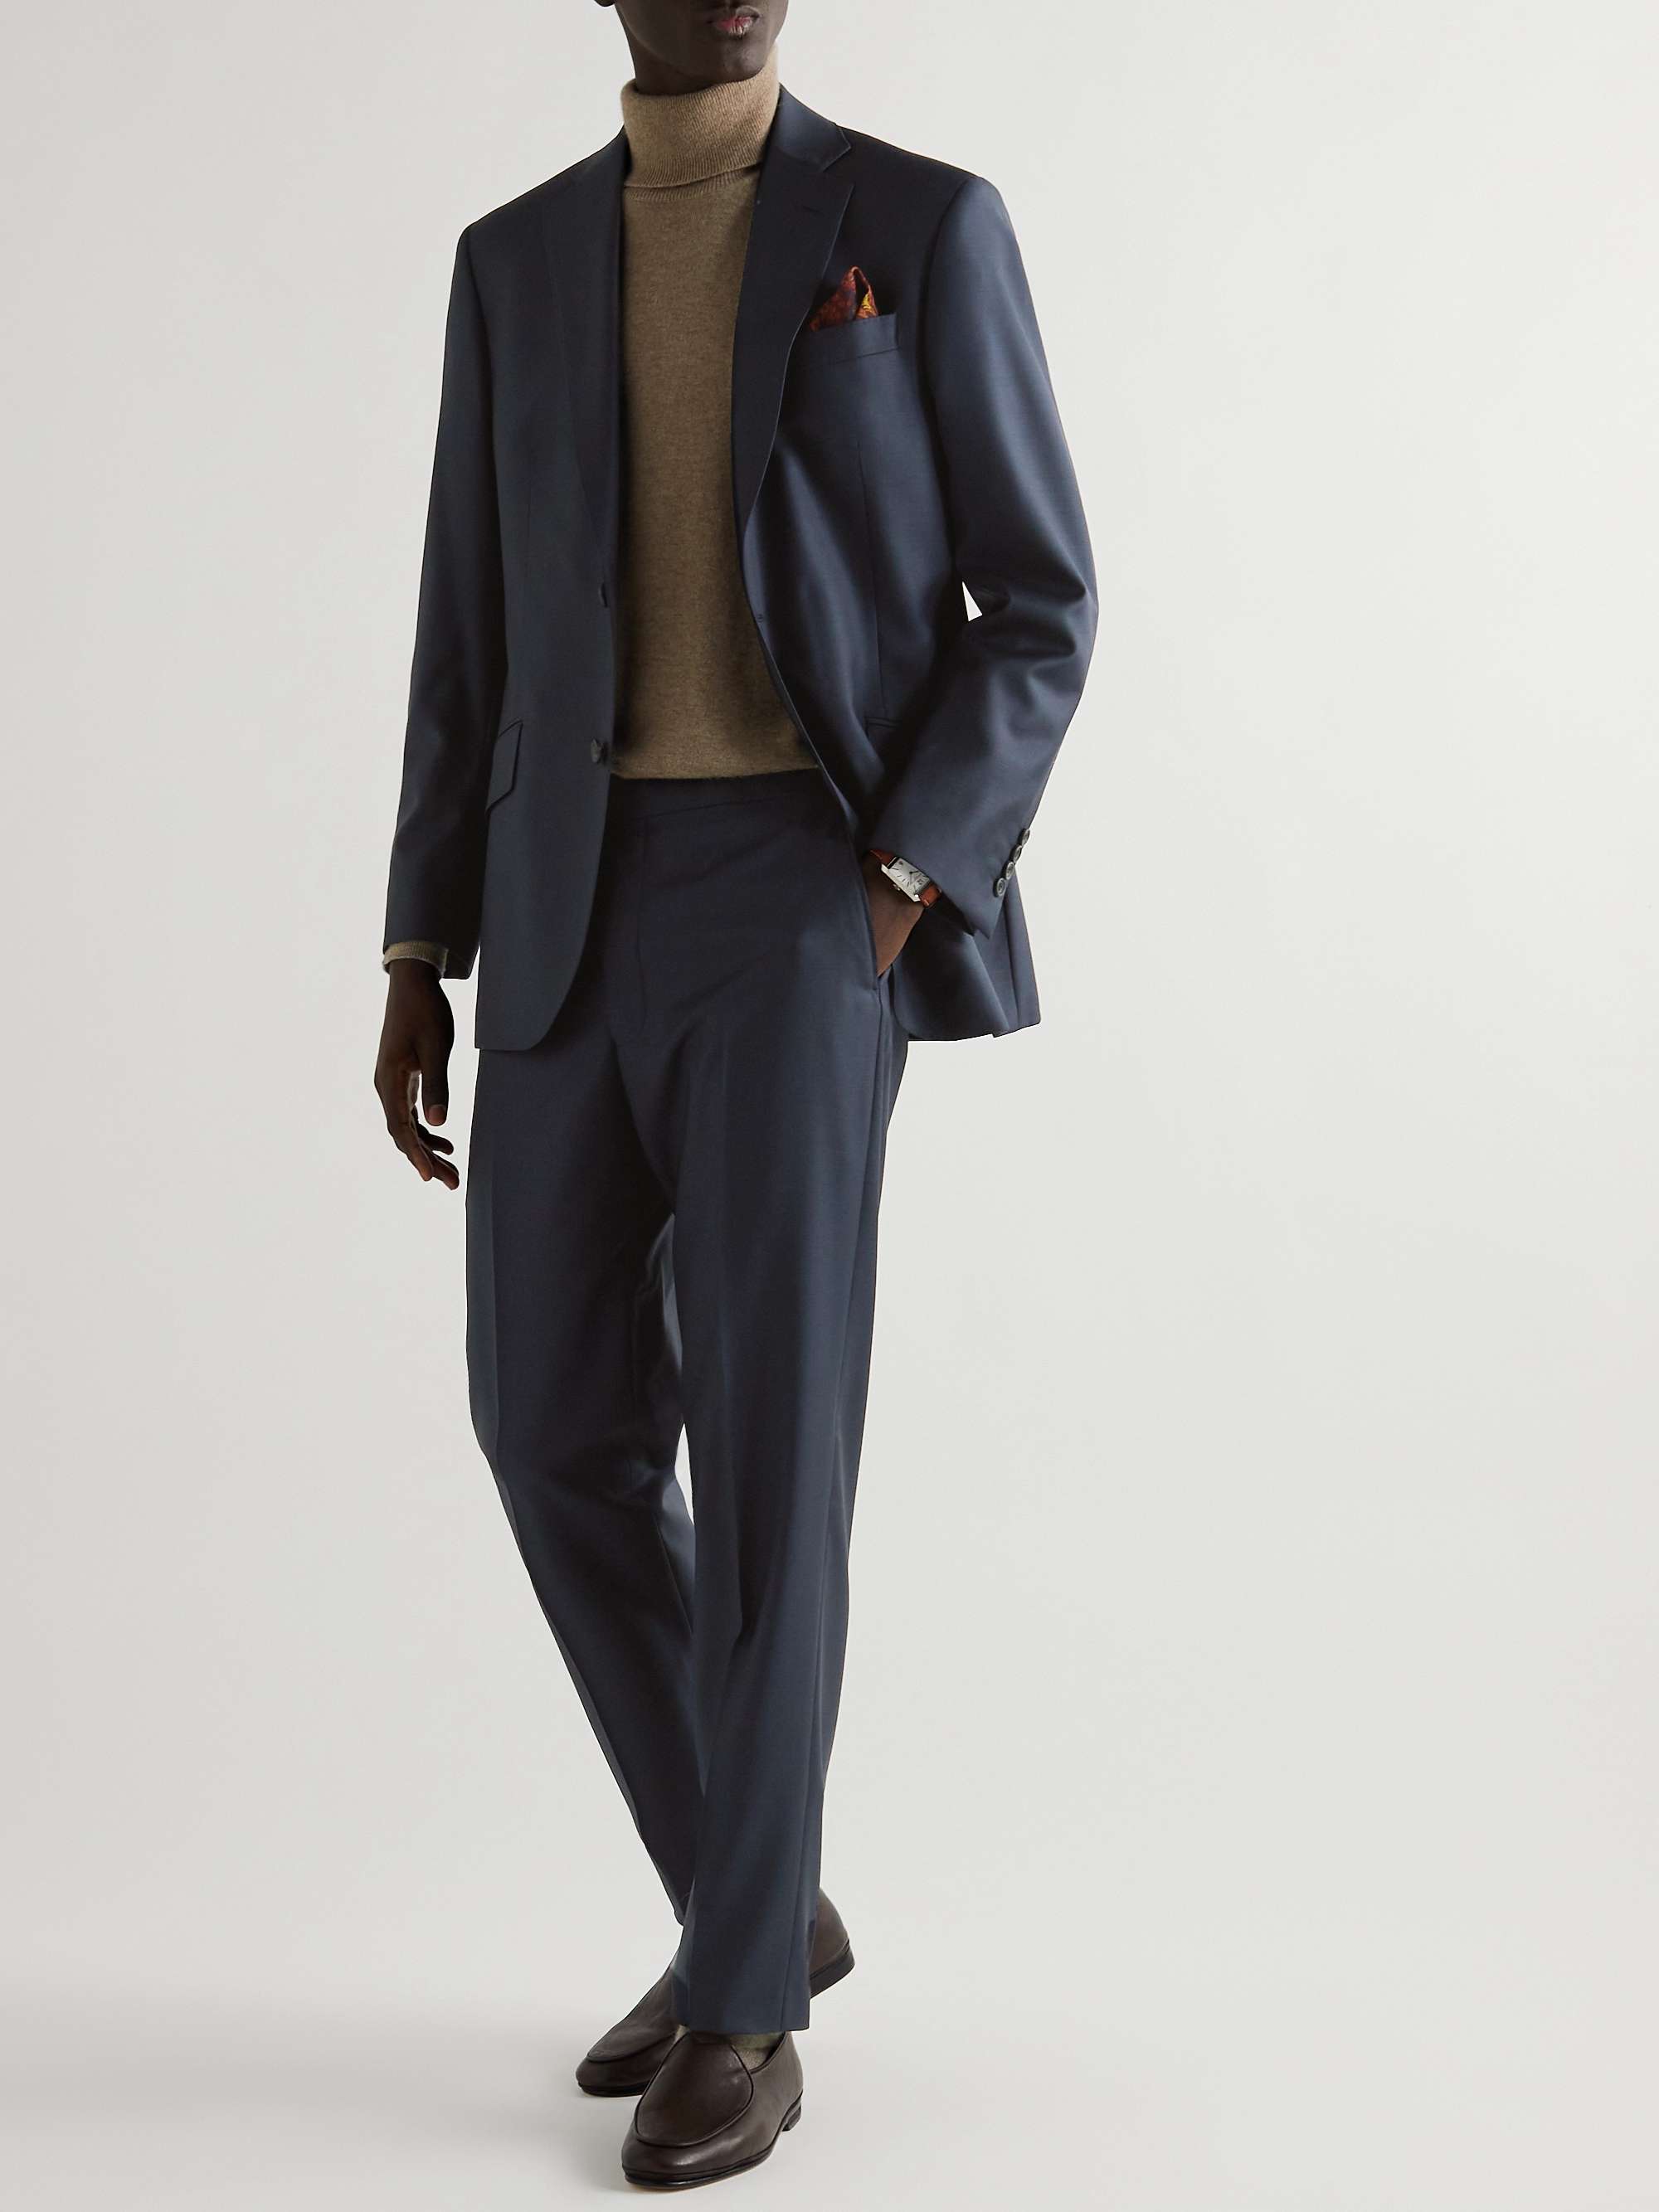 RICHARD JAMES Tapered Sharkskin Wool Suit Trousers